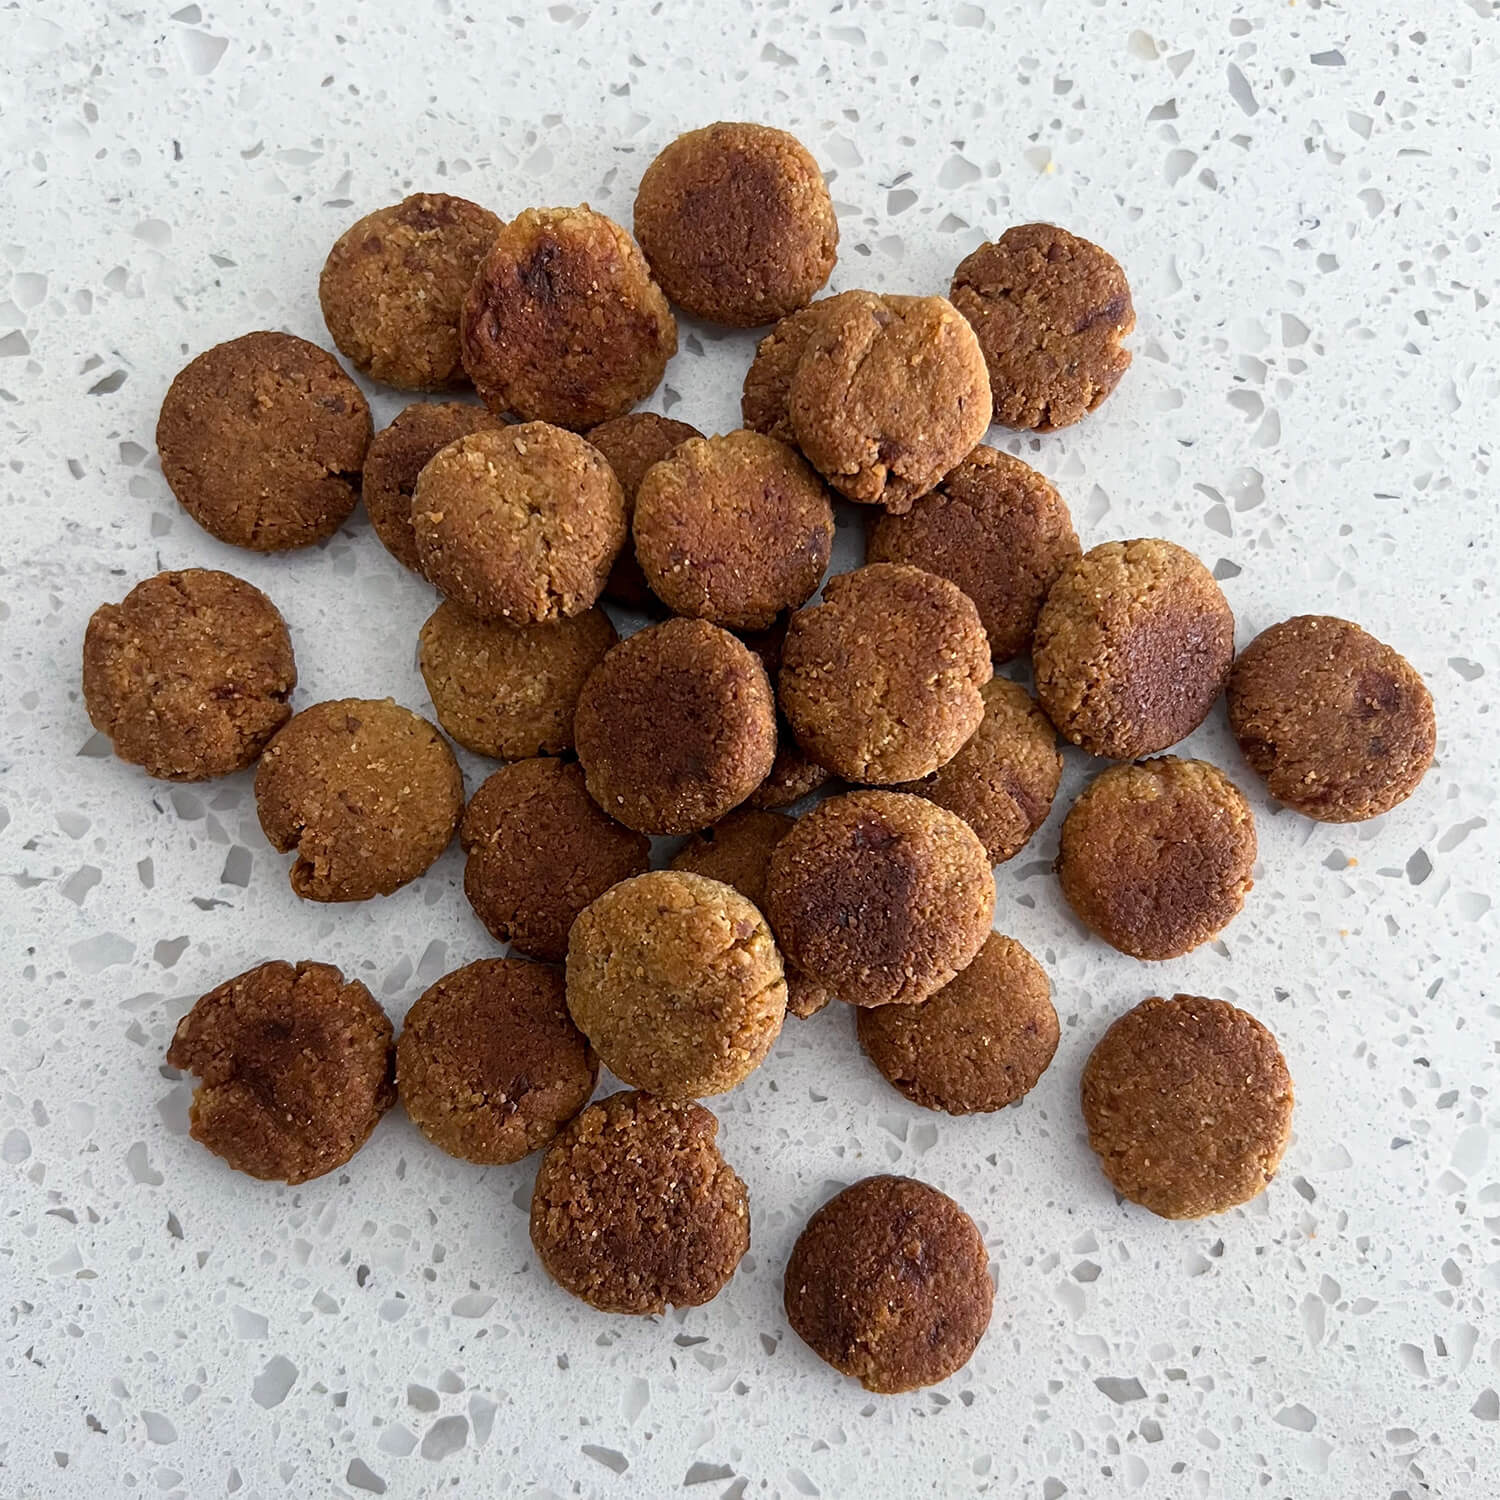 Image displaying Wagging Companions' 'PB & B' (peanut butter and banana) blend dog treats outside of their packaging. These treats consist of a wholesome combination including almond flour, banana, peanut butter, coconut oil, and turmeric. The blend showcases the brand's commitment to nutritious, plant-based ingredients tailored for dogs' health and enjoyment.